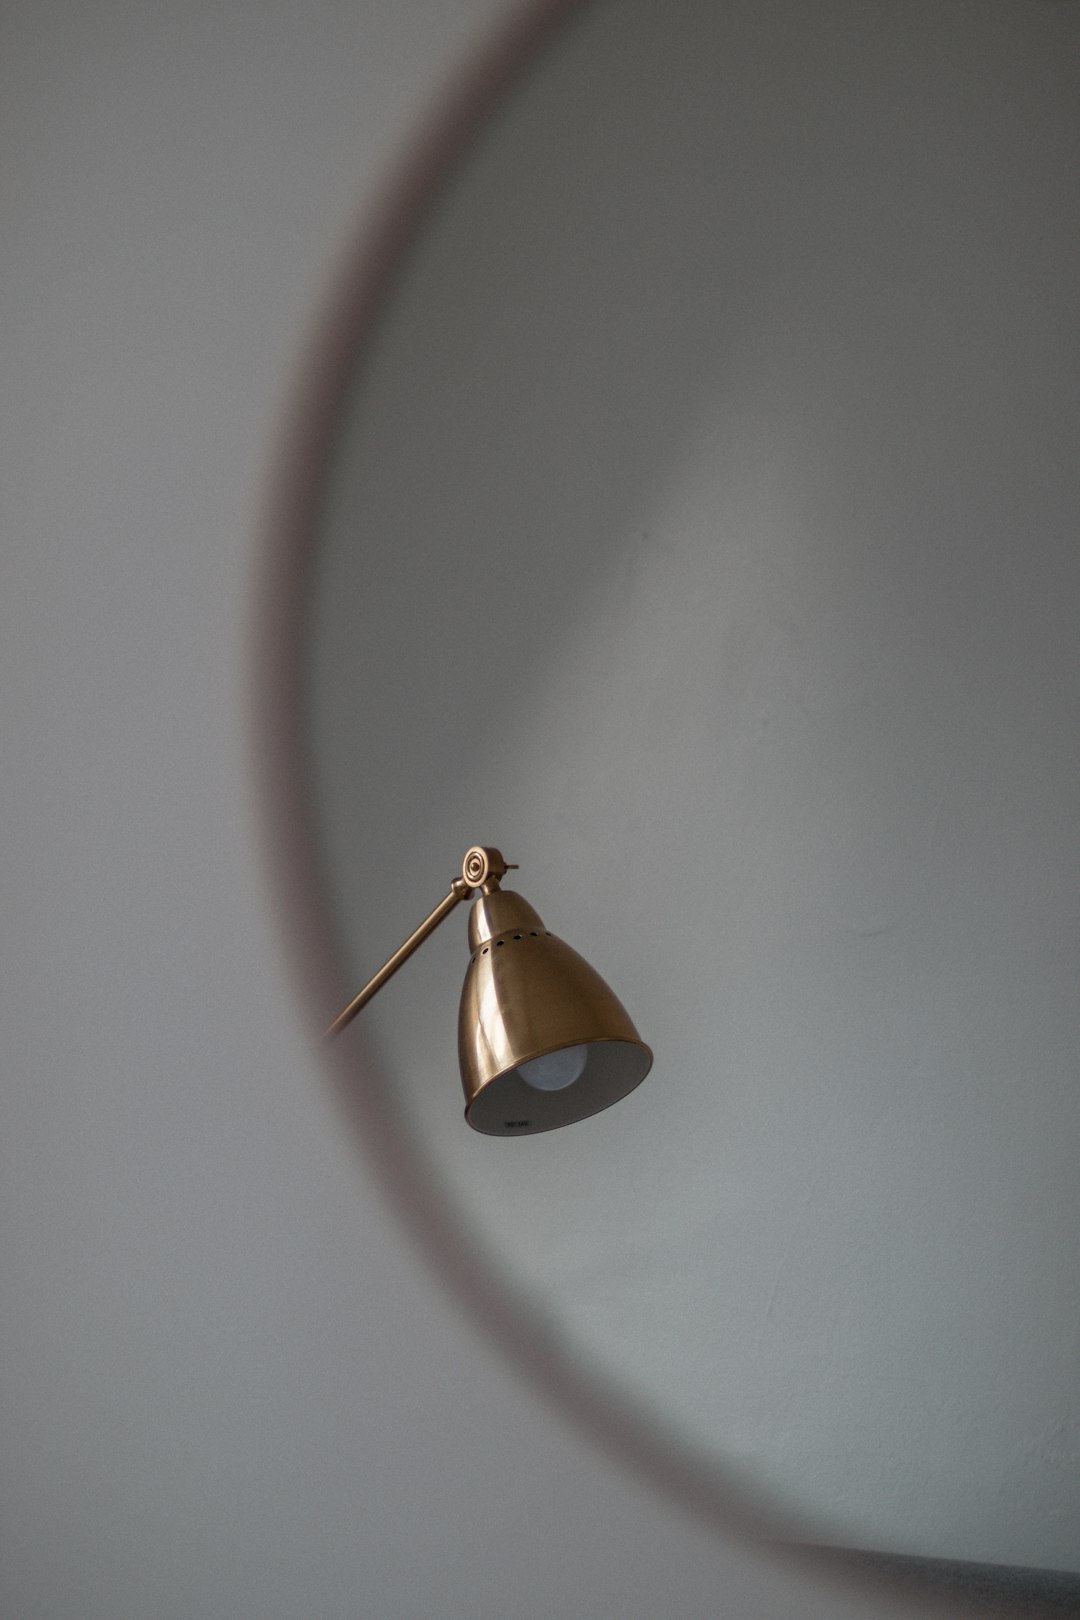 gold pendant lamp turned off